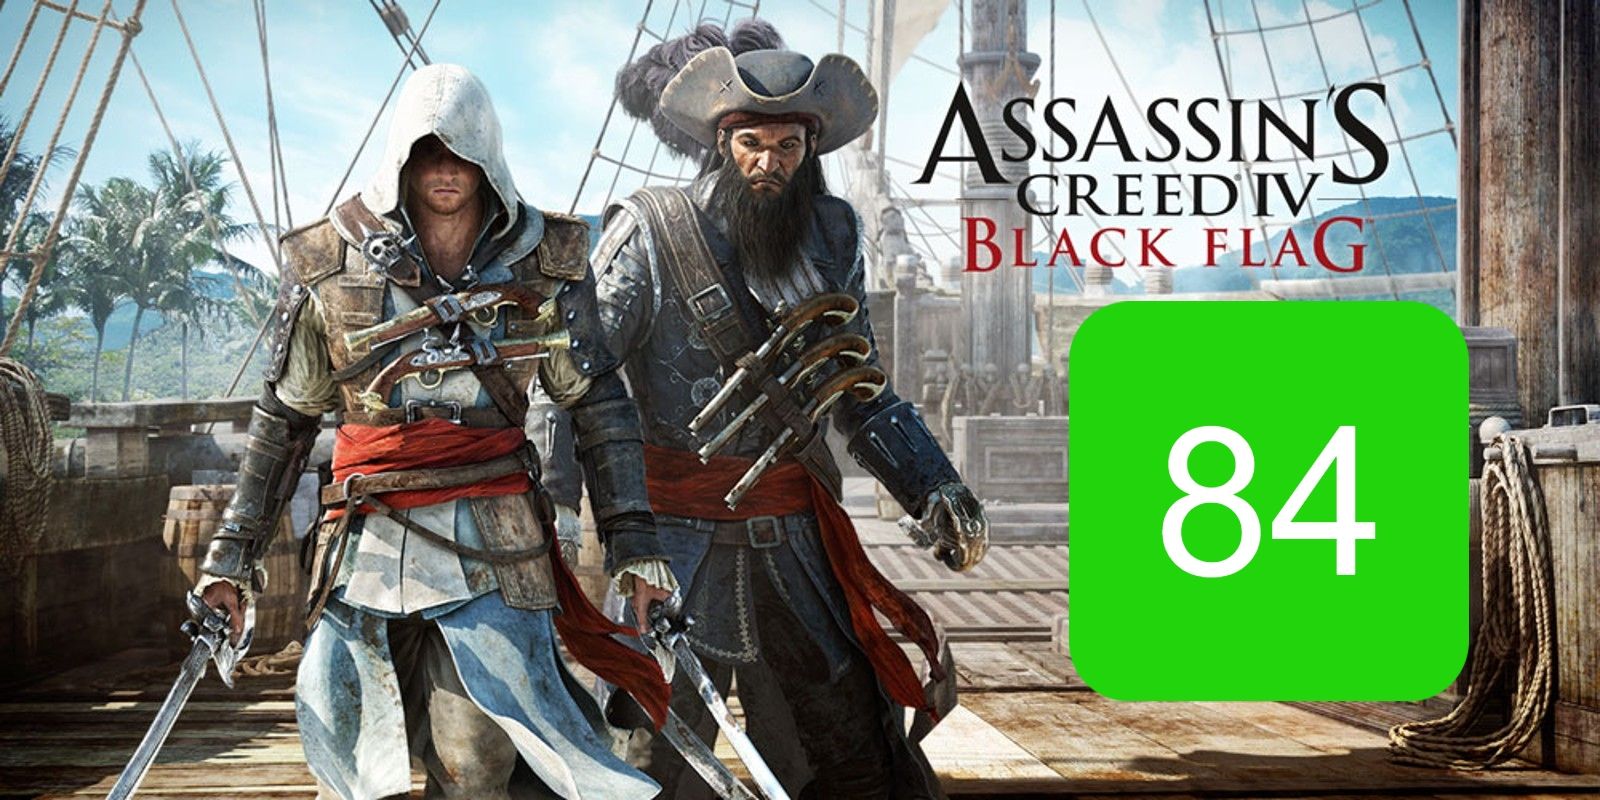 The PC Metascore for Assassin's Creed Black Flag featuring Black Beard and Edward Kenway